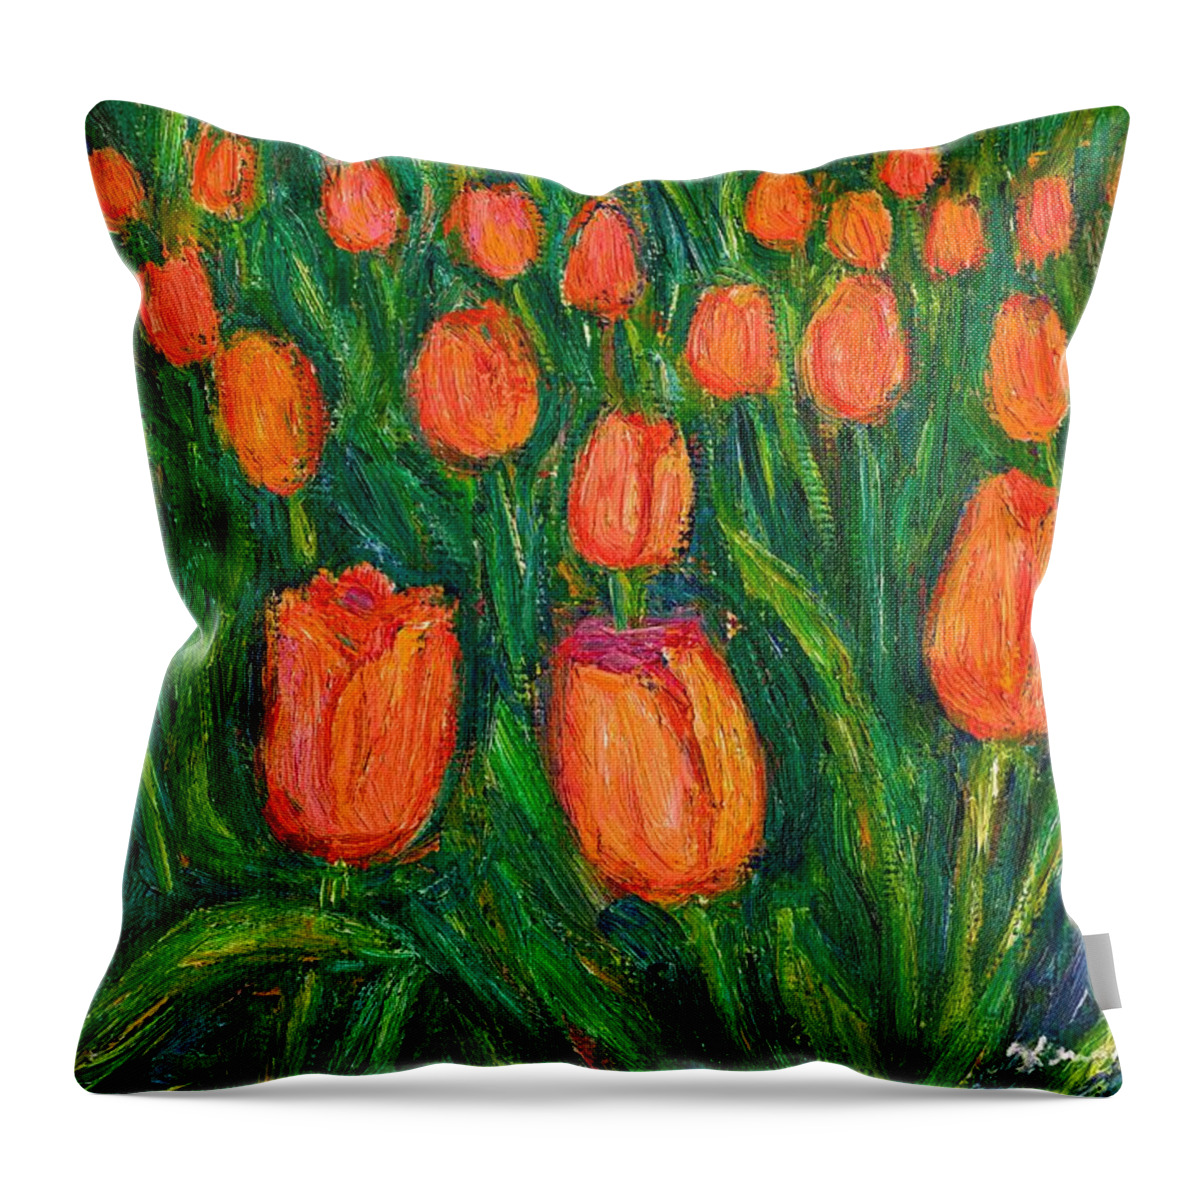 Tulips Throw Pillow featuring the painting Tulip Twirl by Kendall Kessler